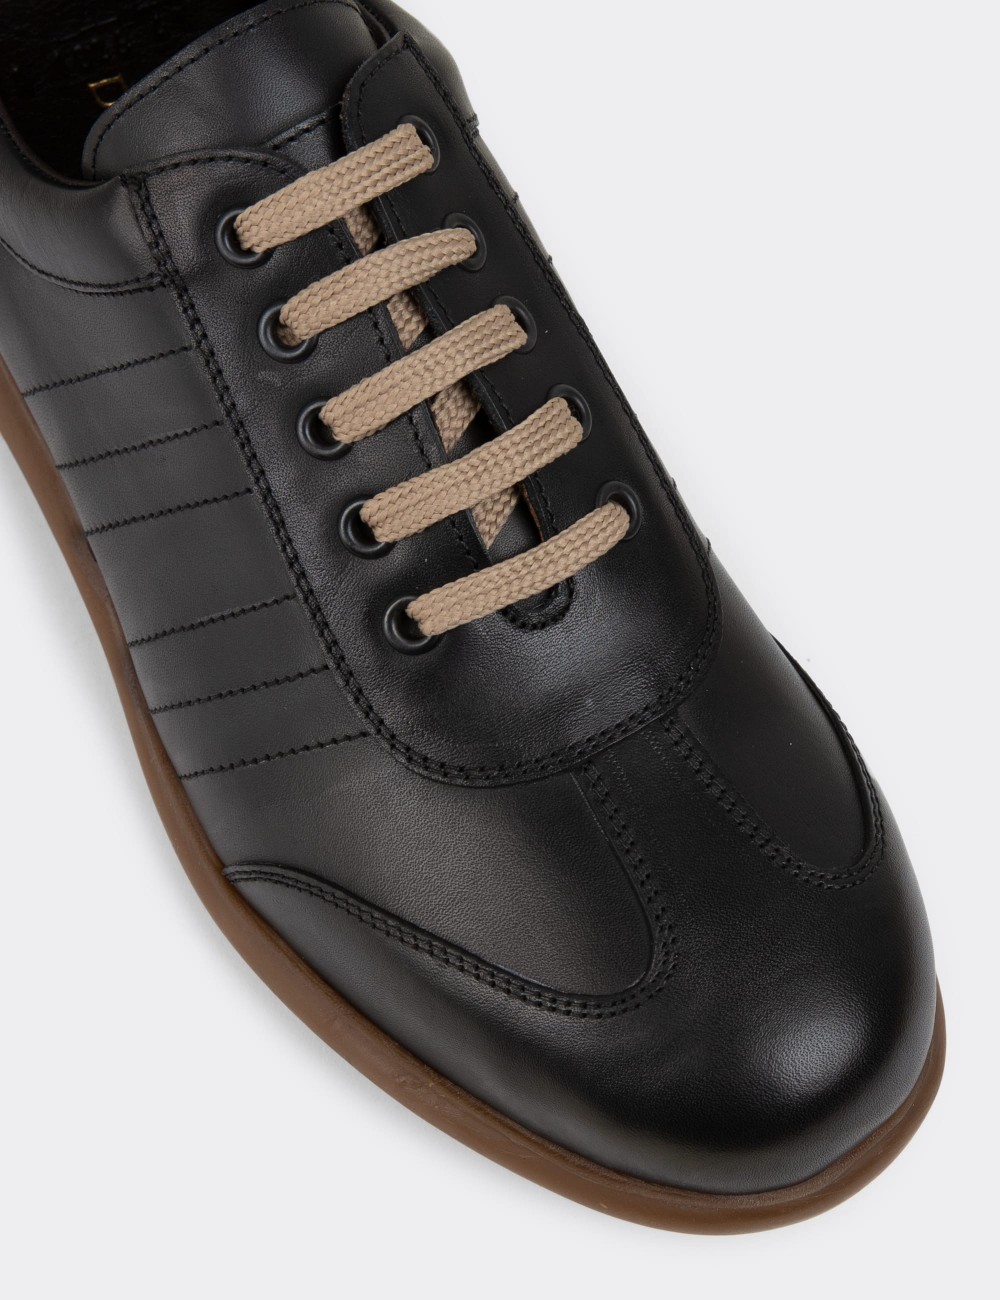 Black Leather Lace-up Shoes - 01826MSYHC06